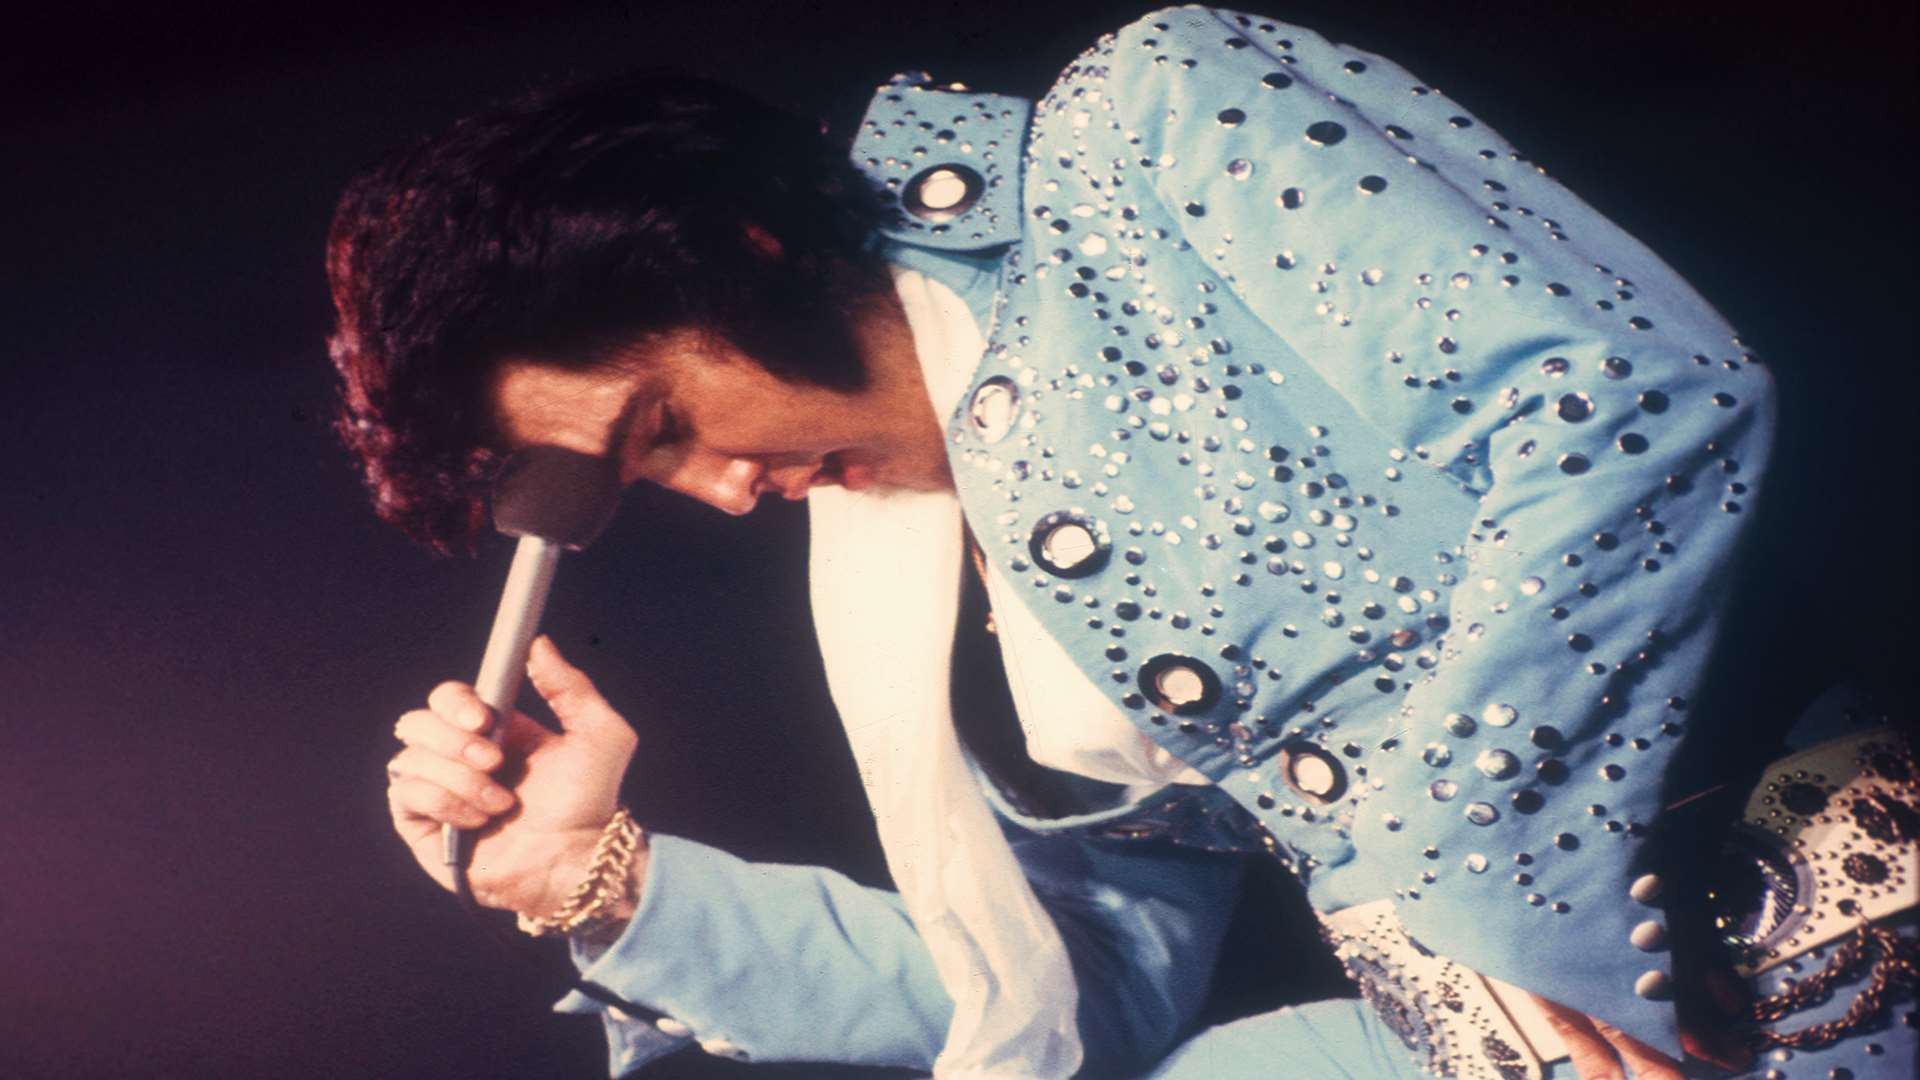 Elvis in 1972, one of the images on show at the Elvis on Tour exhibition at The O2